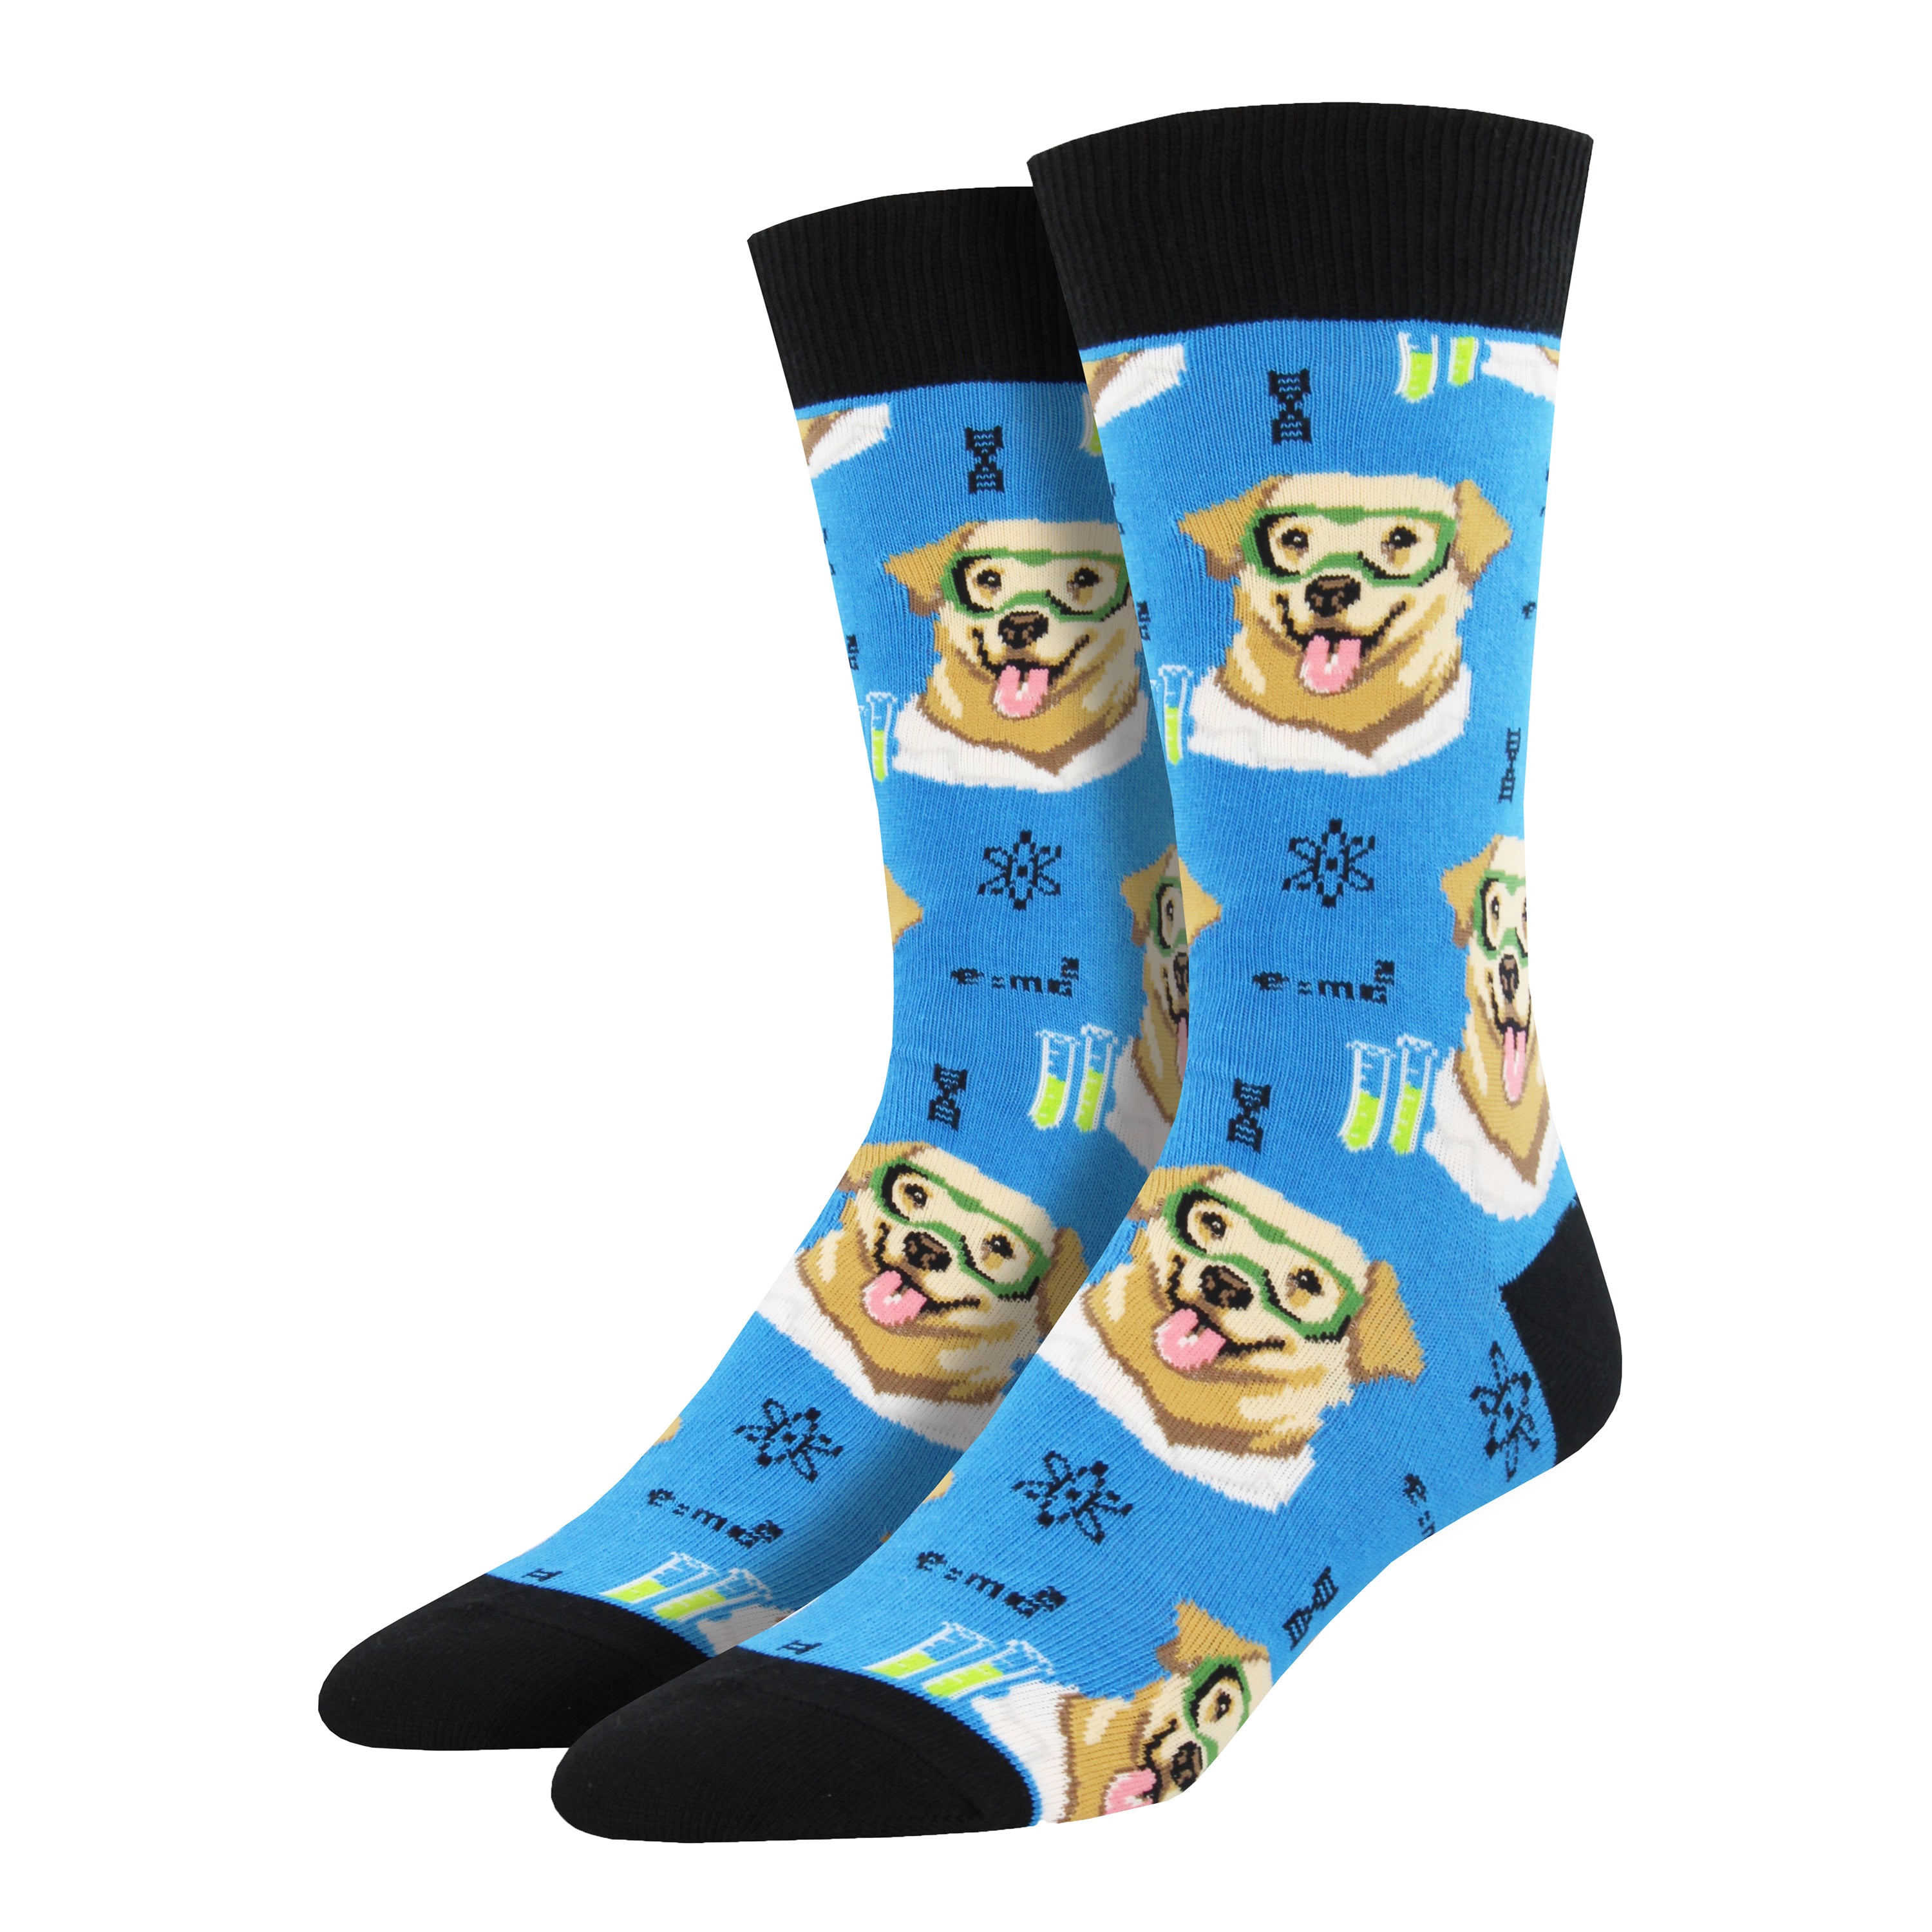 Shown on a foot form, a pair of Socksmith's sky blue cotton men's crew socks with black heel/cuff/toe, test tubes, atoms, mathematic equations and labradors in lab coats and safety goggles